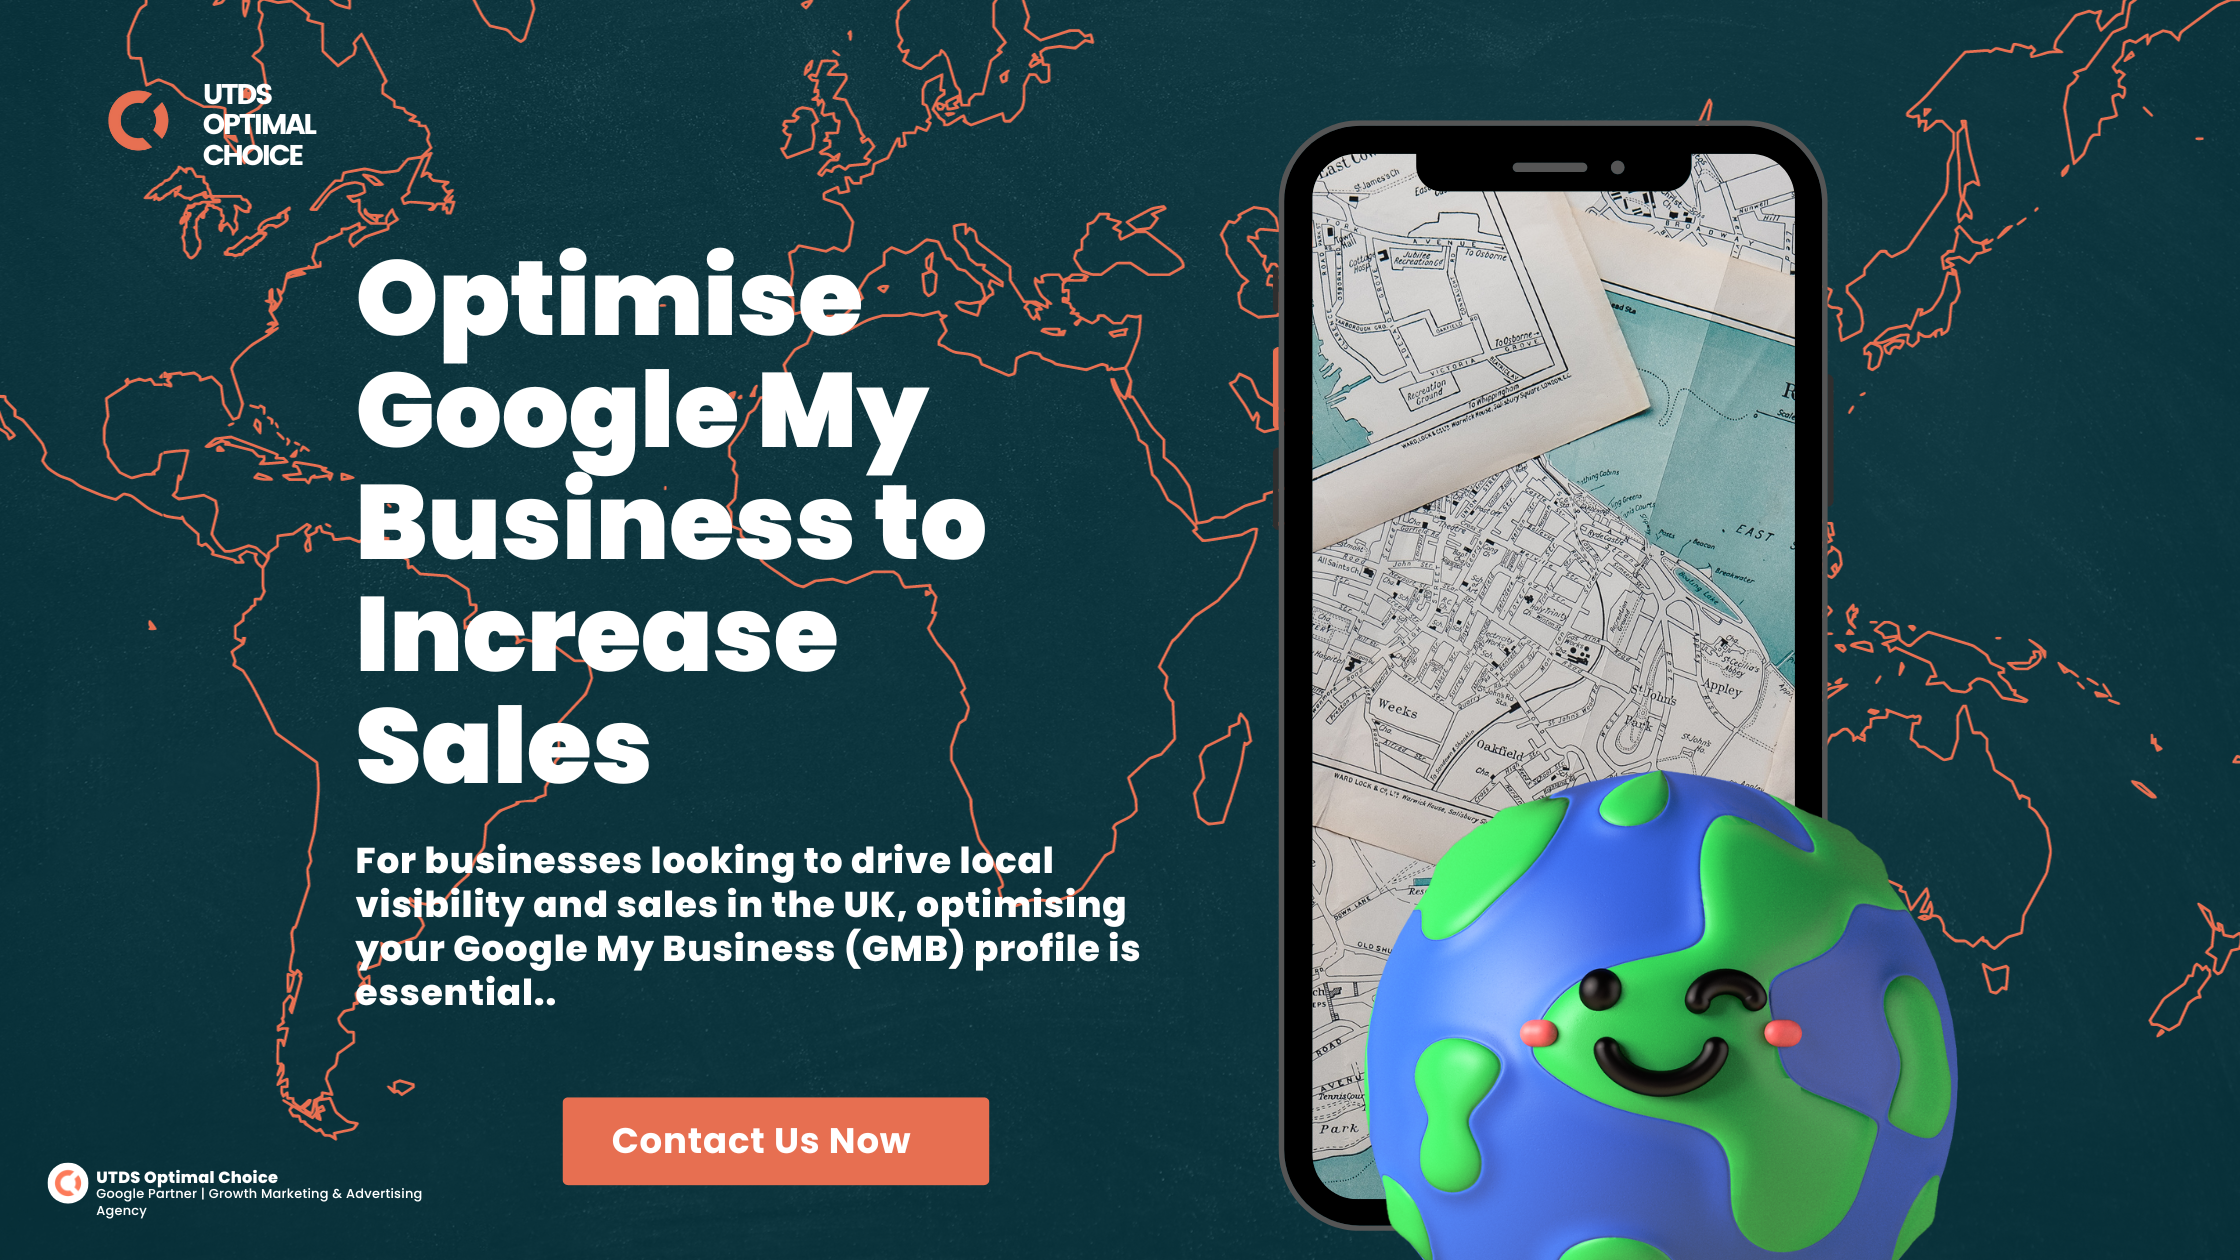 Optimise Google My Business to Increase Sales